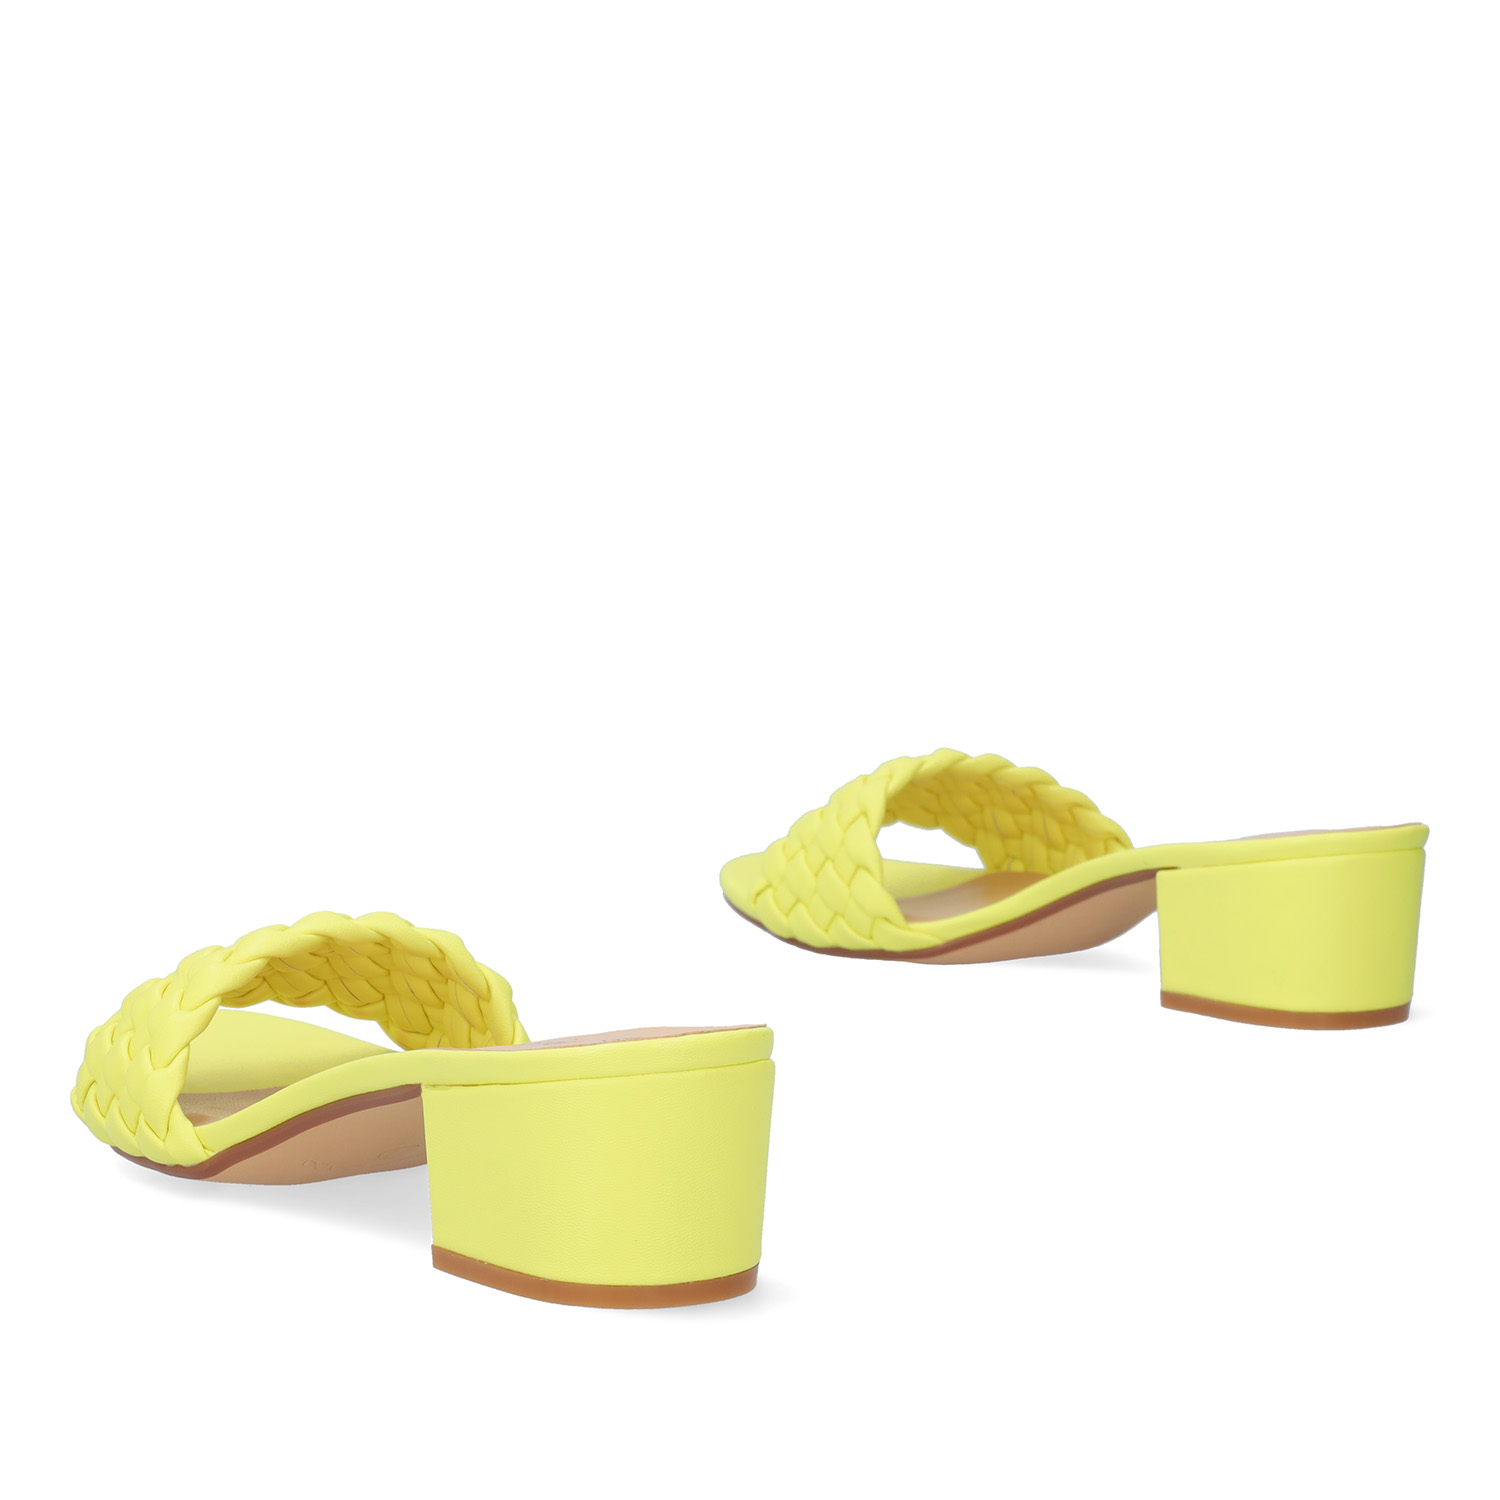 Squared heel mule in soft neon yellow material 